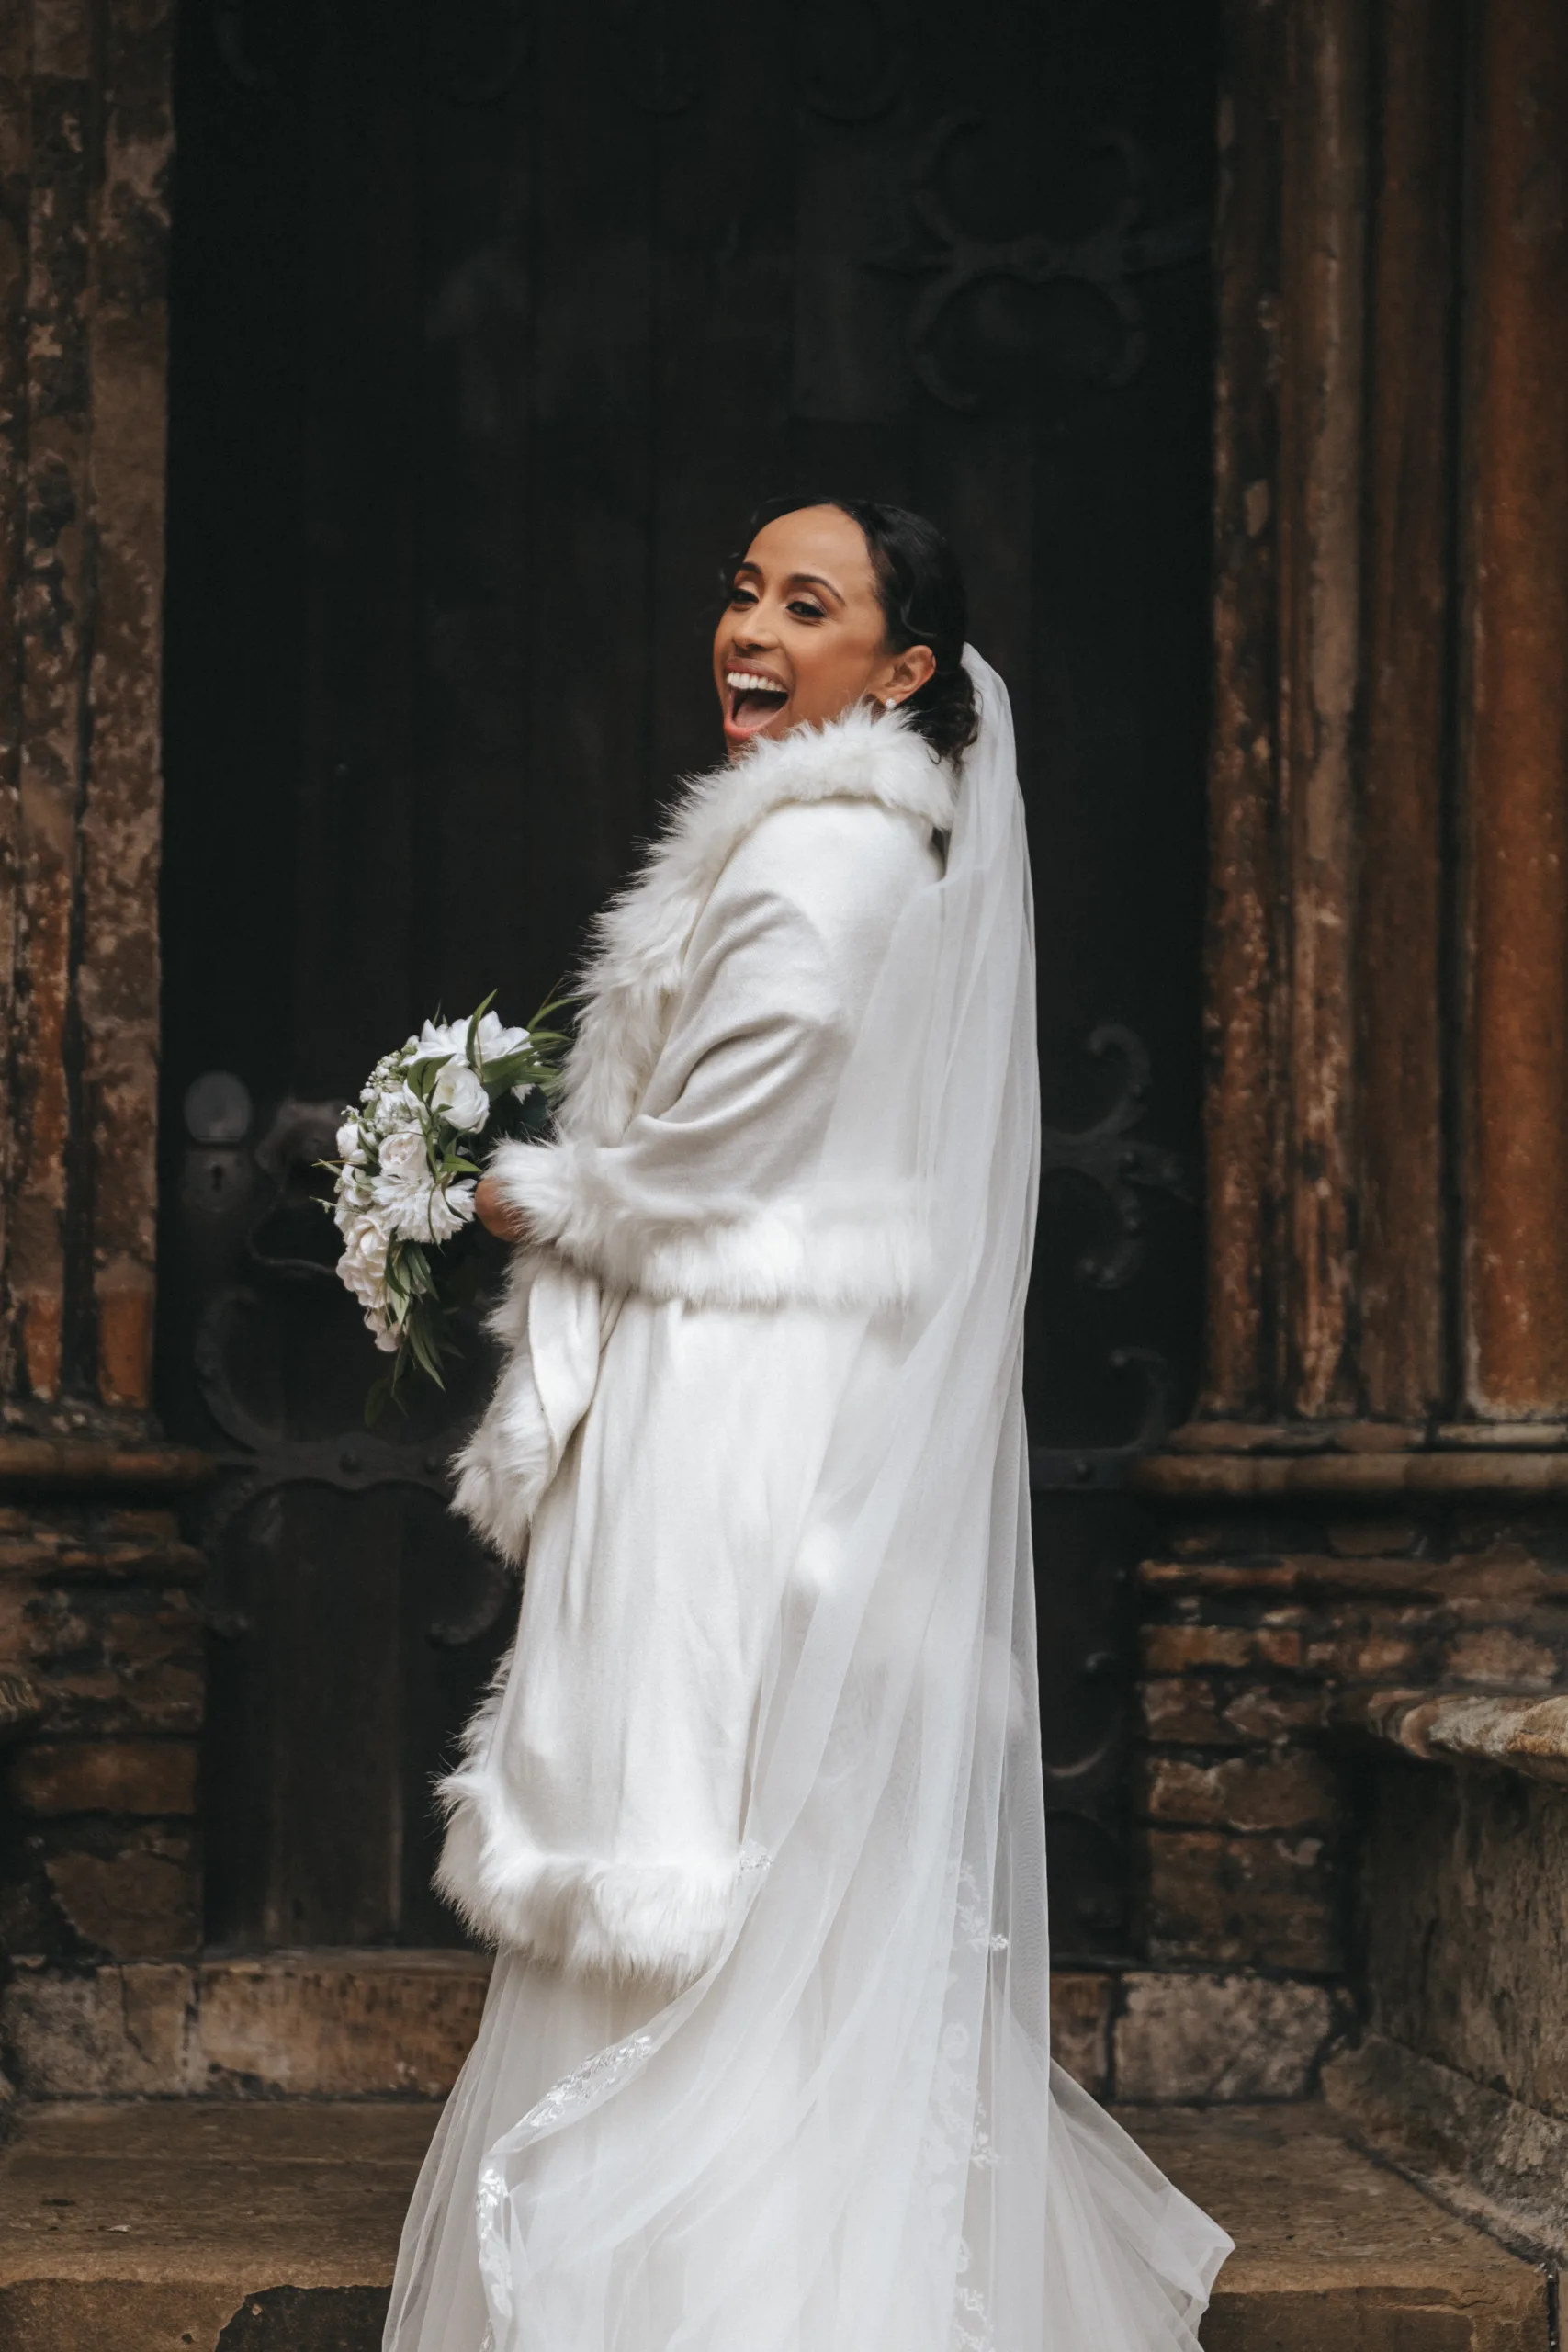 A bride in a white wedding dress laughing in front of a door, captured by a photographer in Lincolnshire.